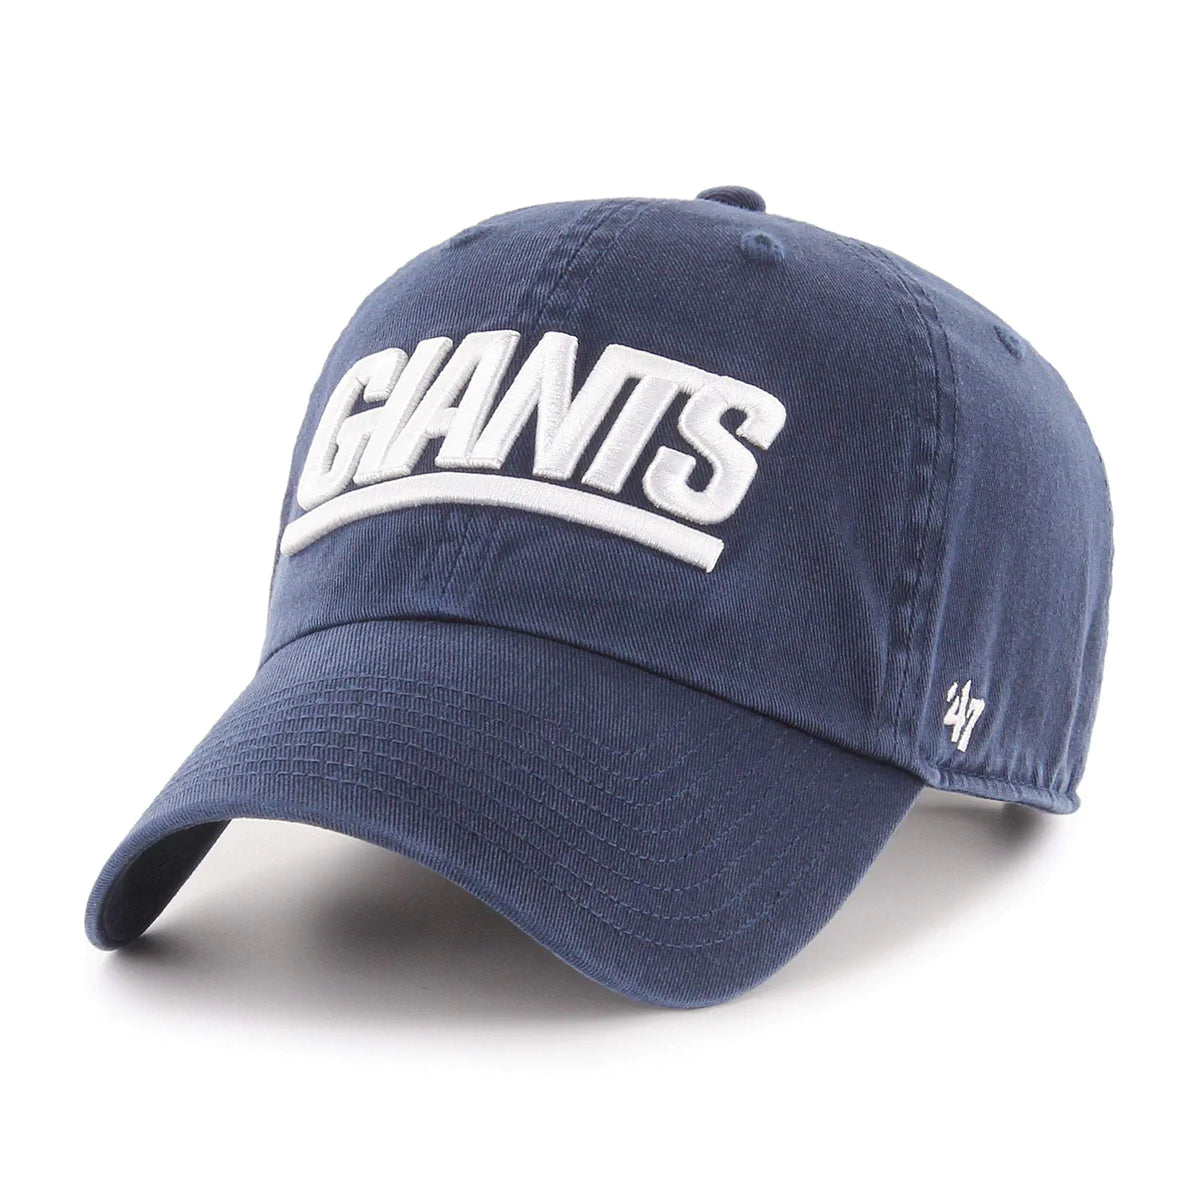 New York Giants '47 Clean Up - Navy